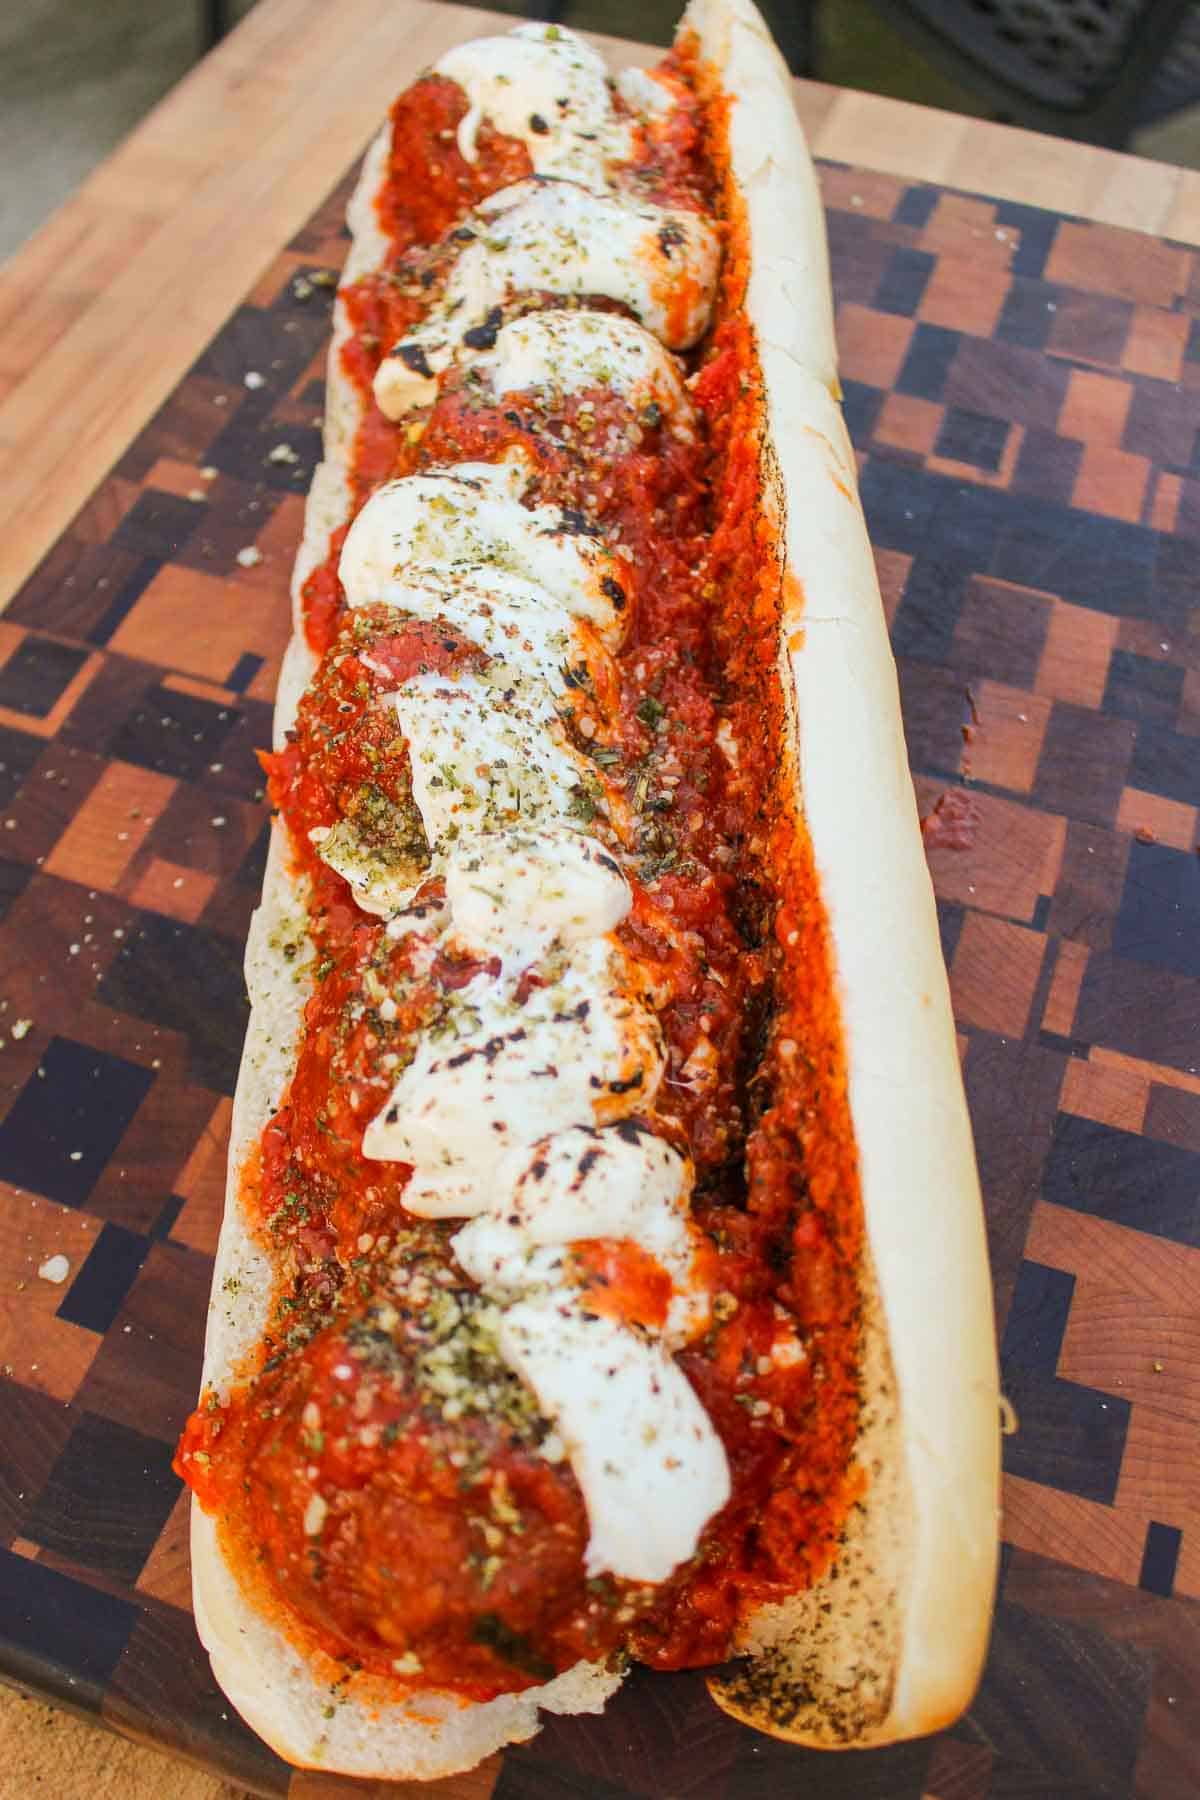 One final shot of the smoked meatball sub.